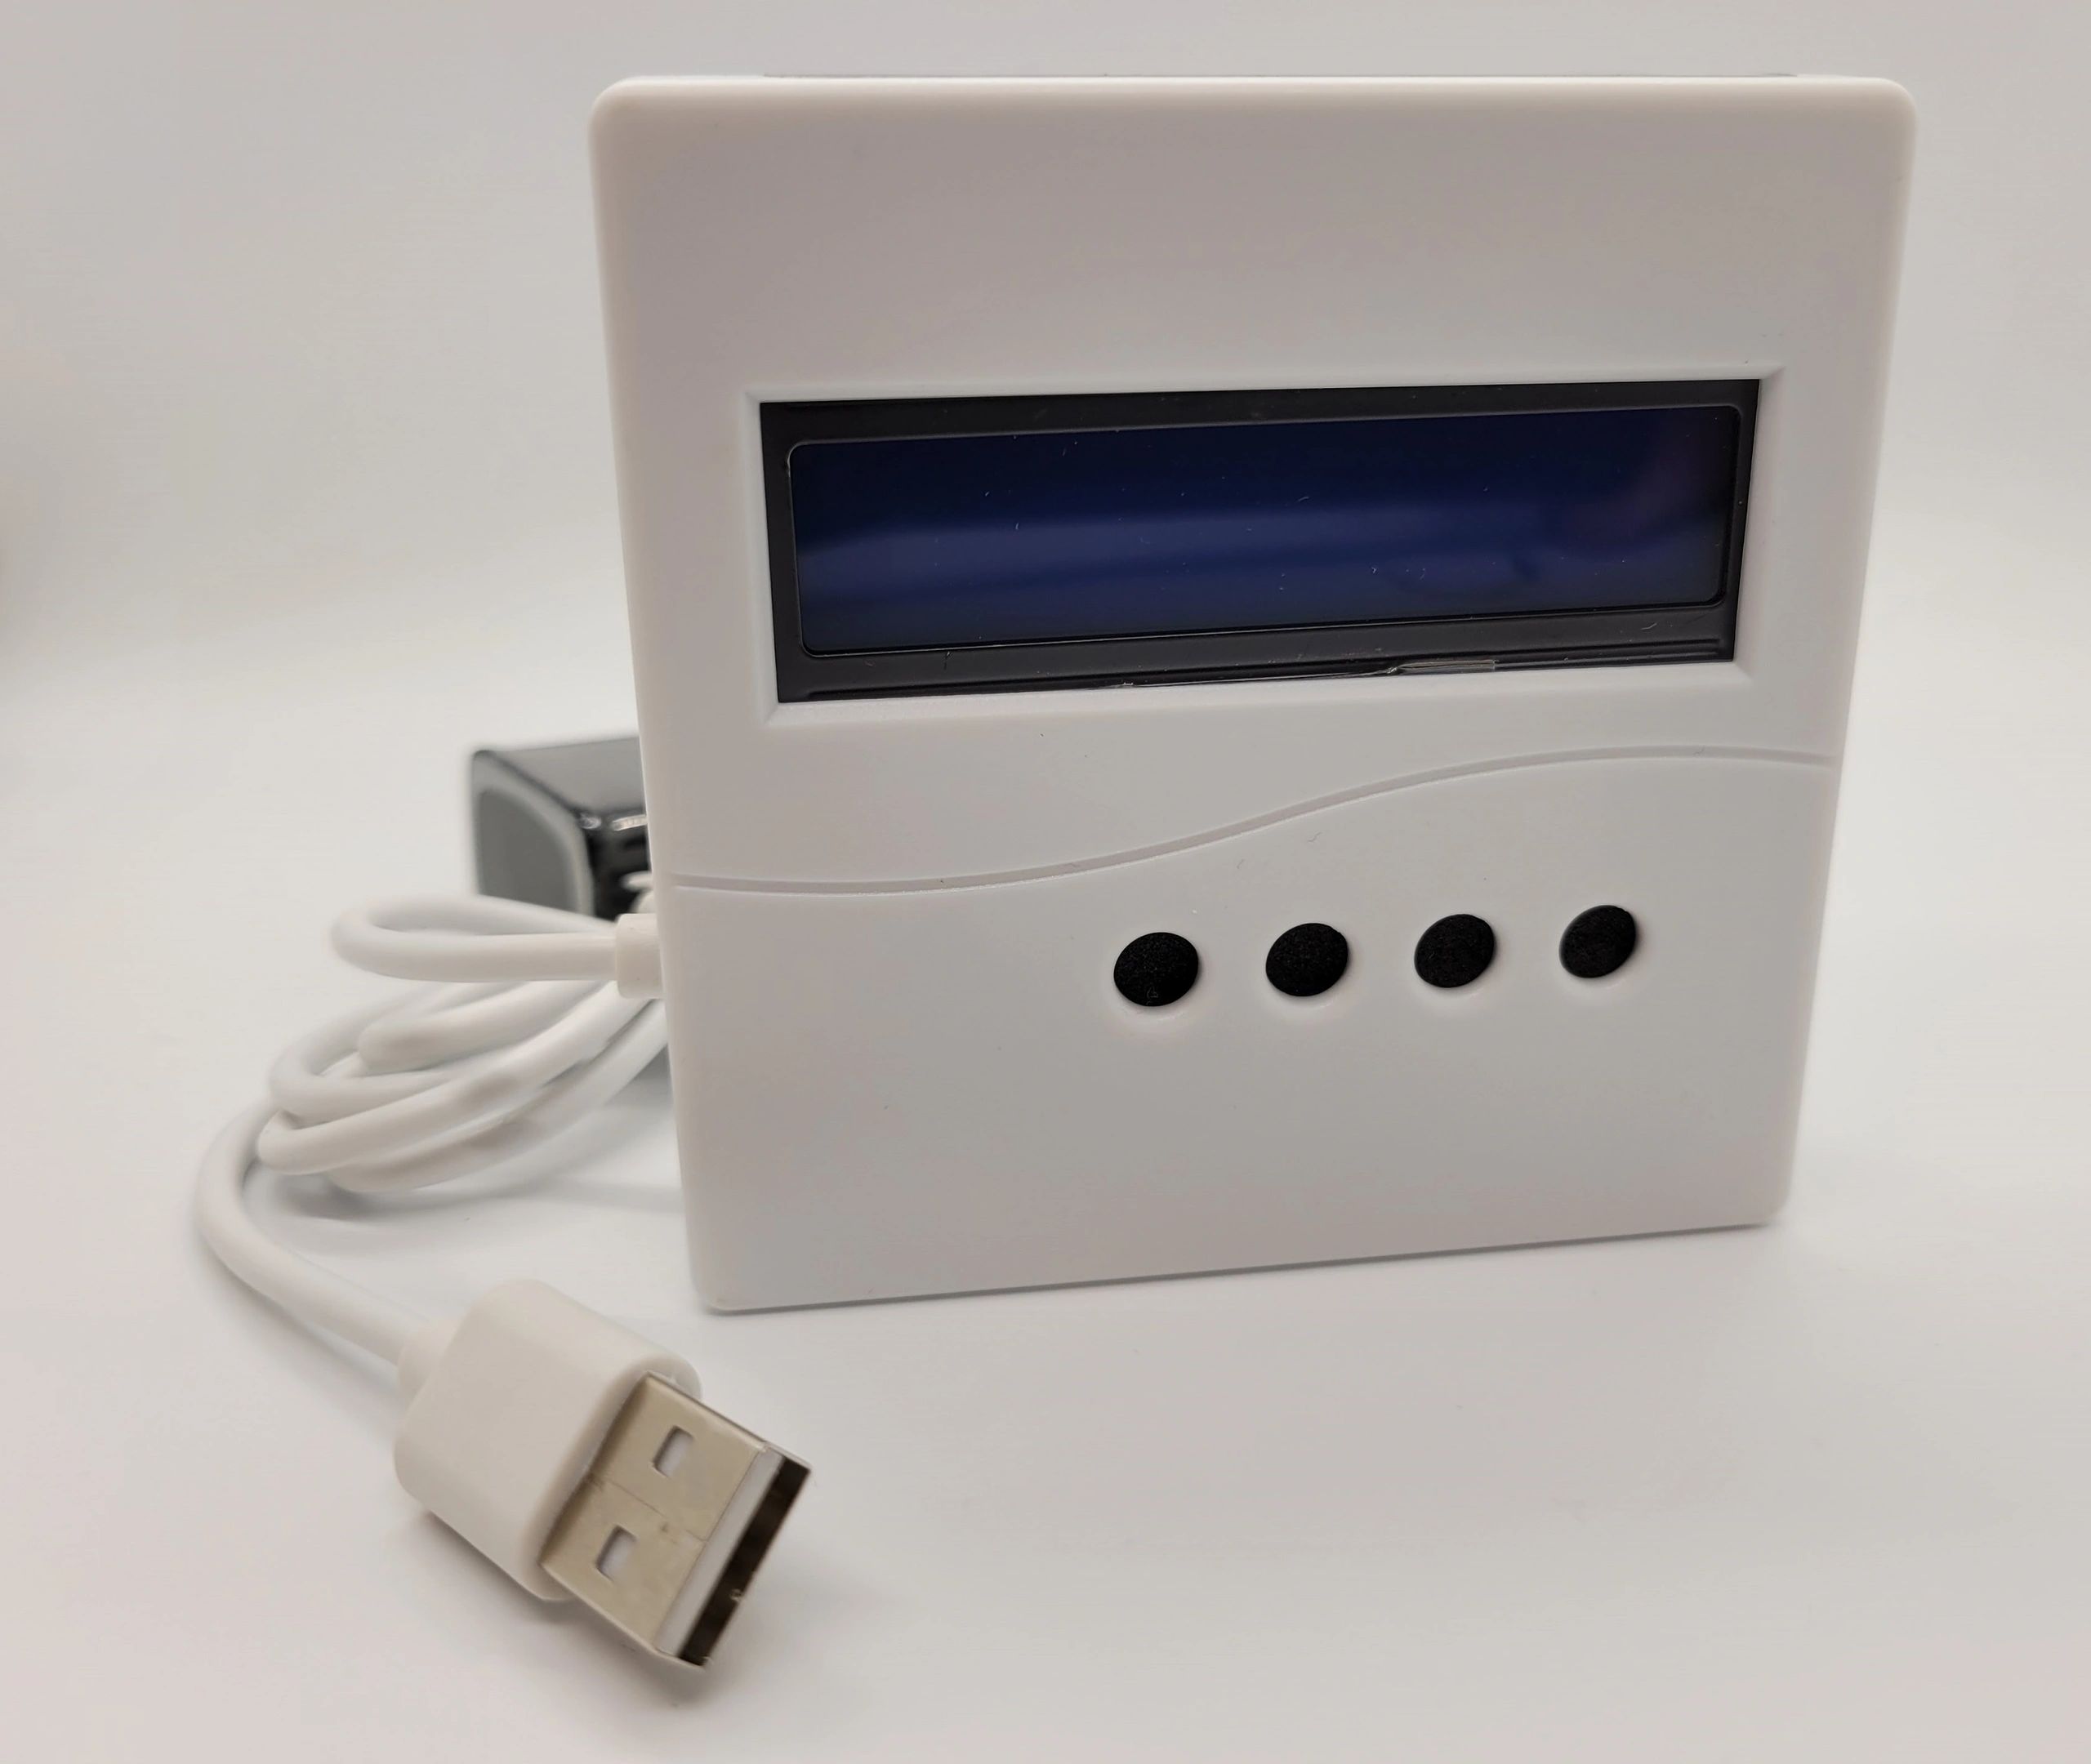 pp-Code WiFi Temperature and Humidity Sensor, Monitor From Anywhere with  Email & SMS Alerts (Standard)